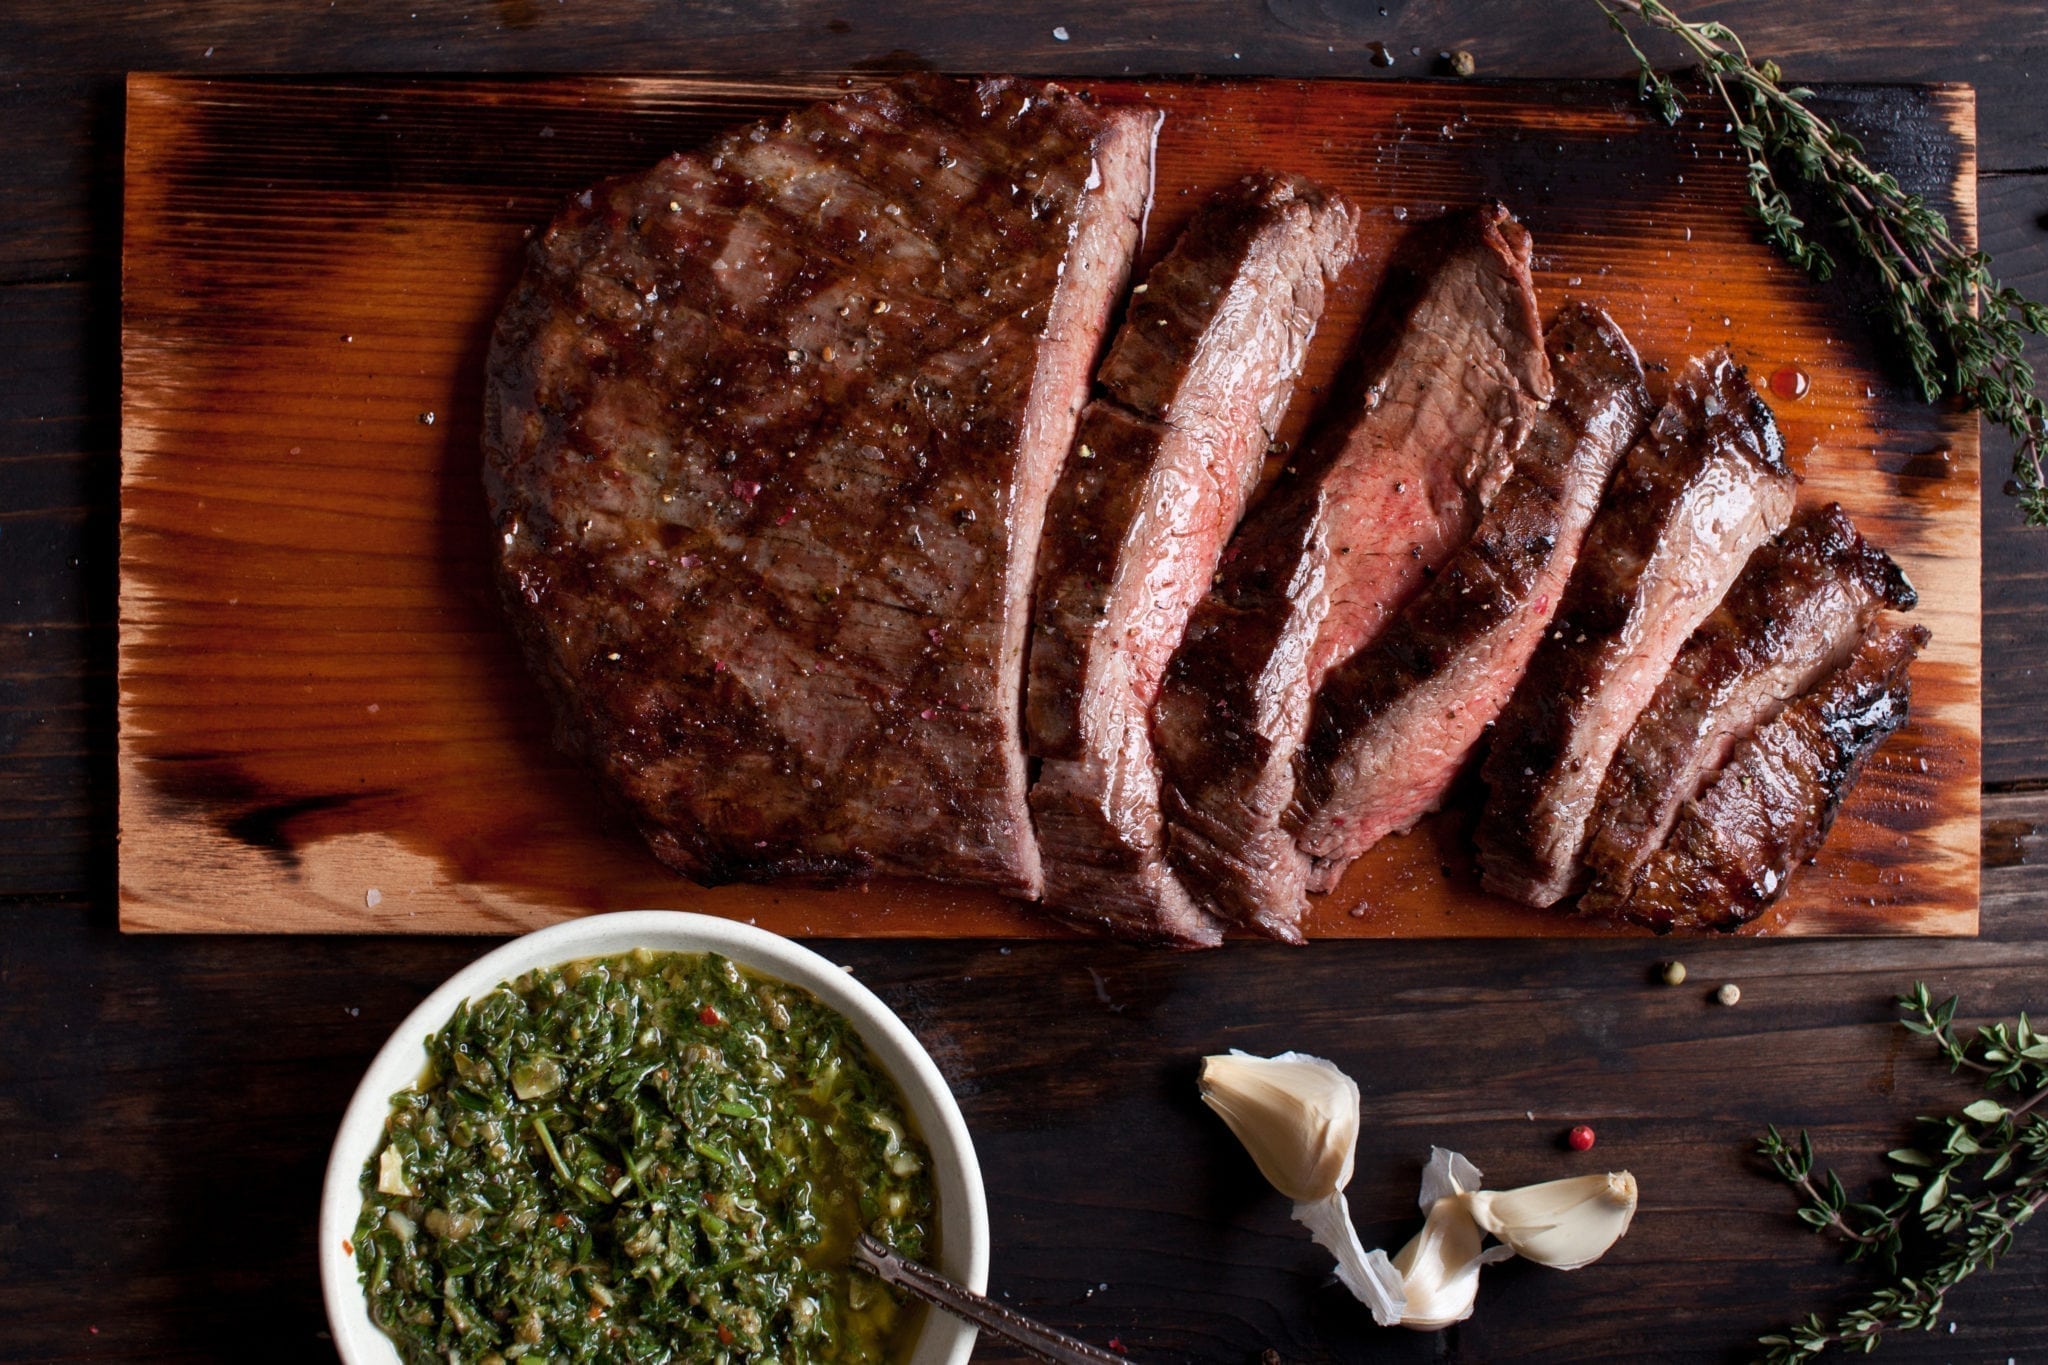 Hickory Planked Flank Steak with Chimichurri Sauce